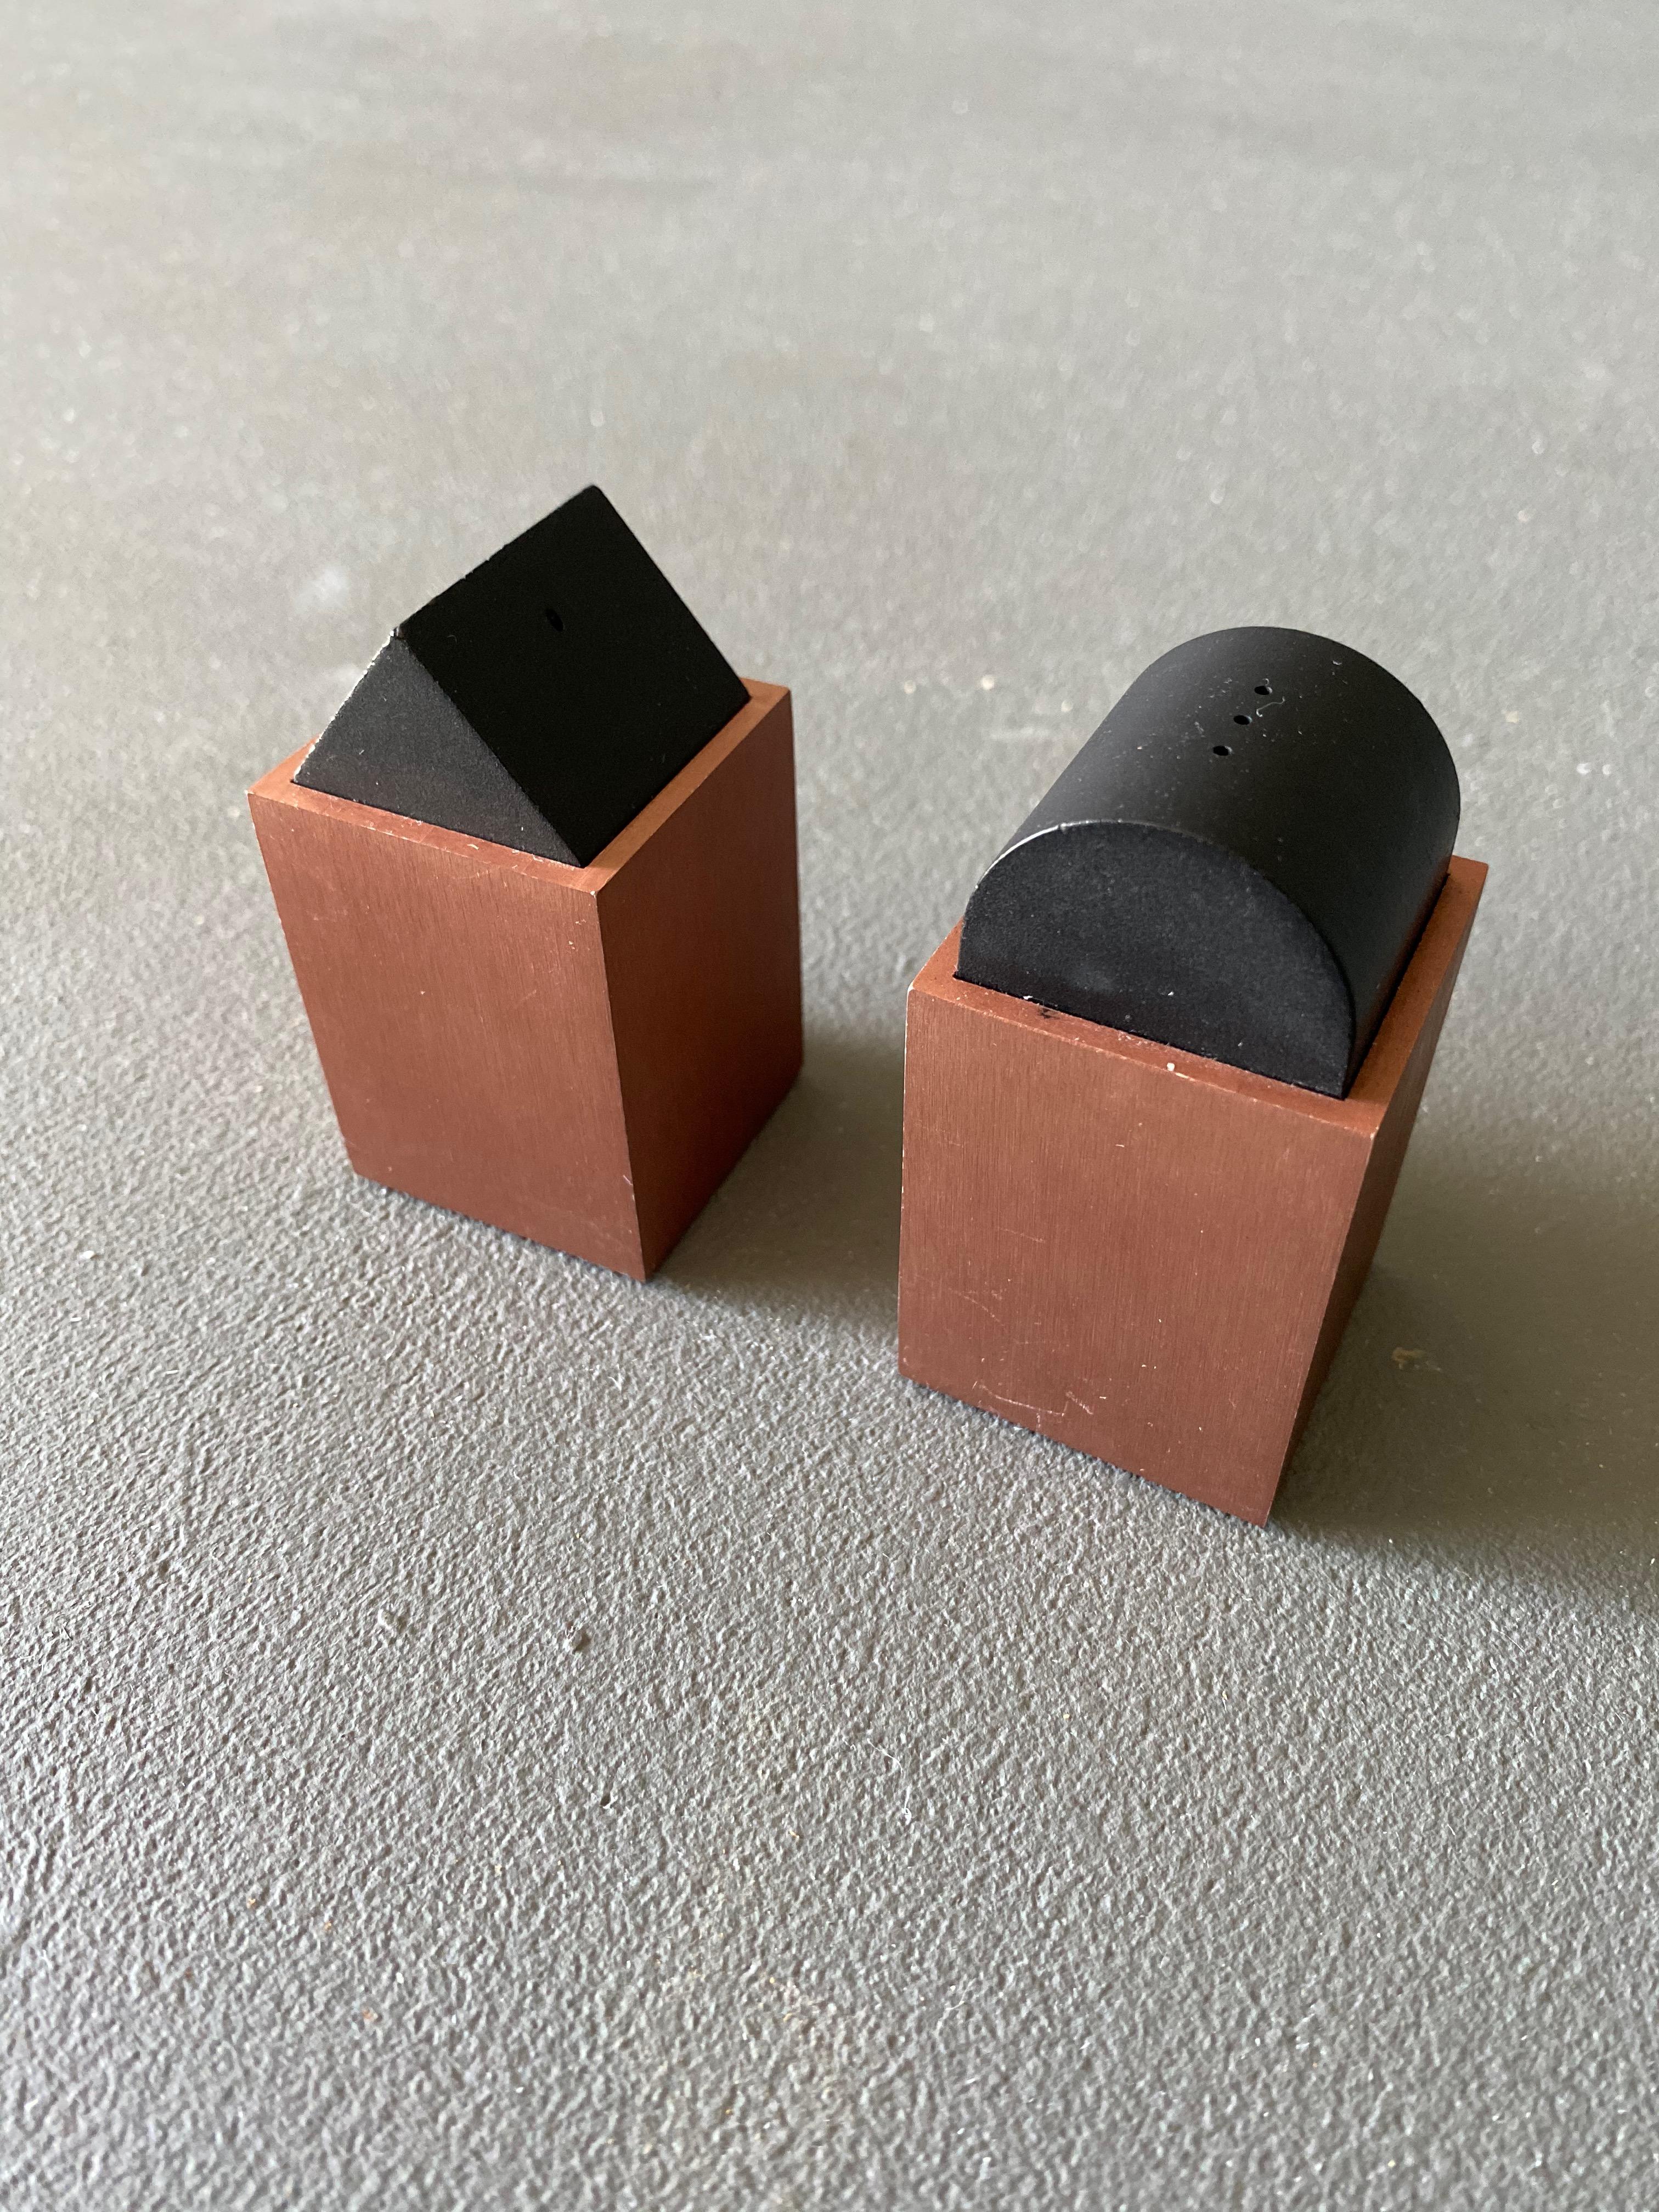 David Tisdale Postmodern Salt & Pepper Shakers for Elika 1988 In Good Condition For Sale In Costa Mesa, CA